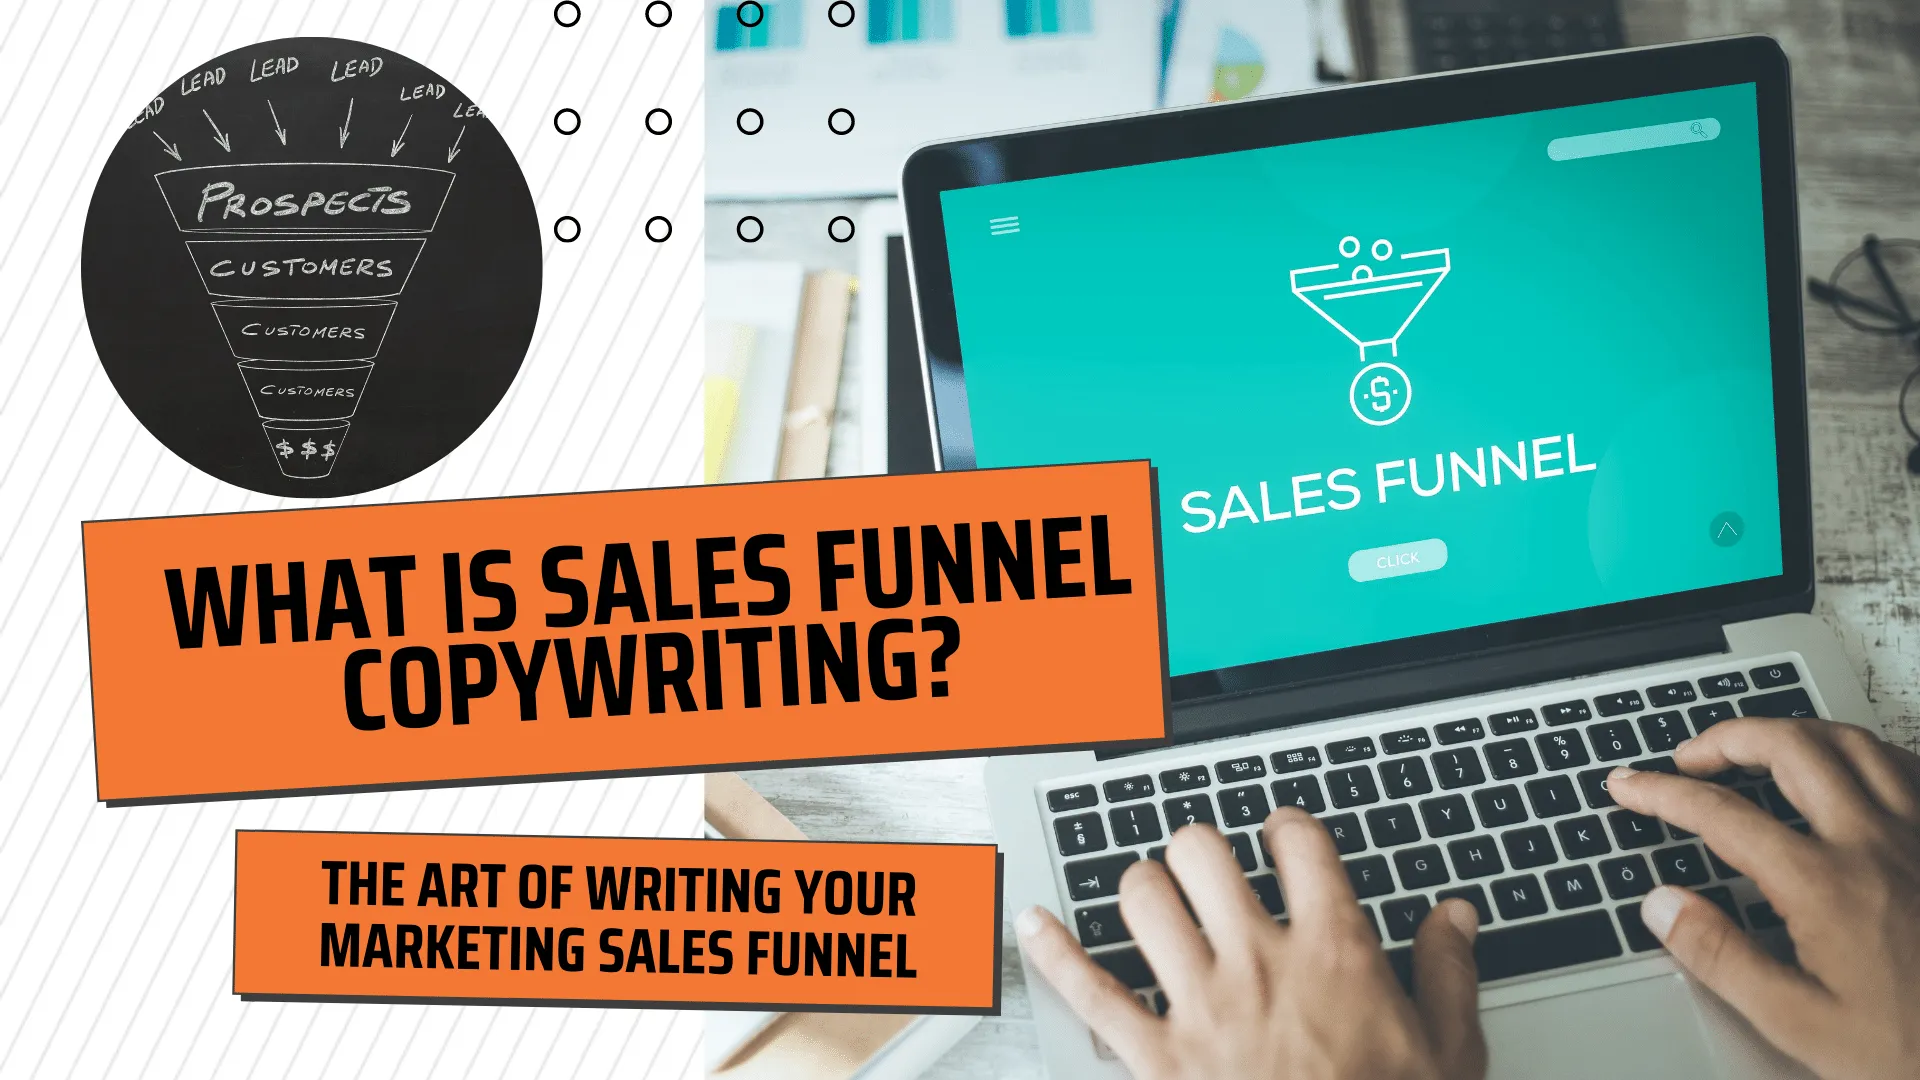 What is sales funnel copywriting?